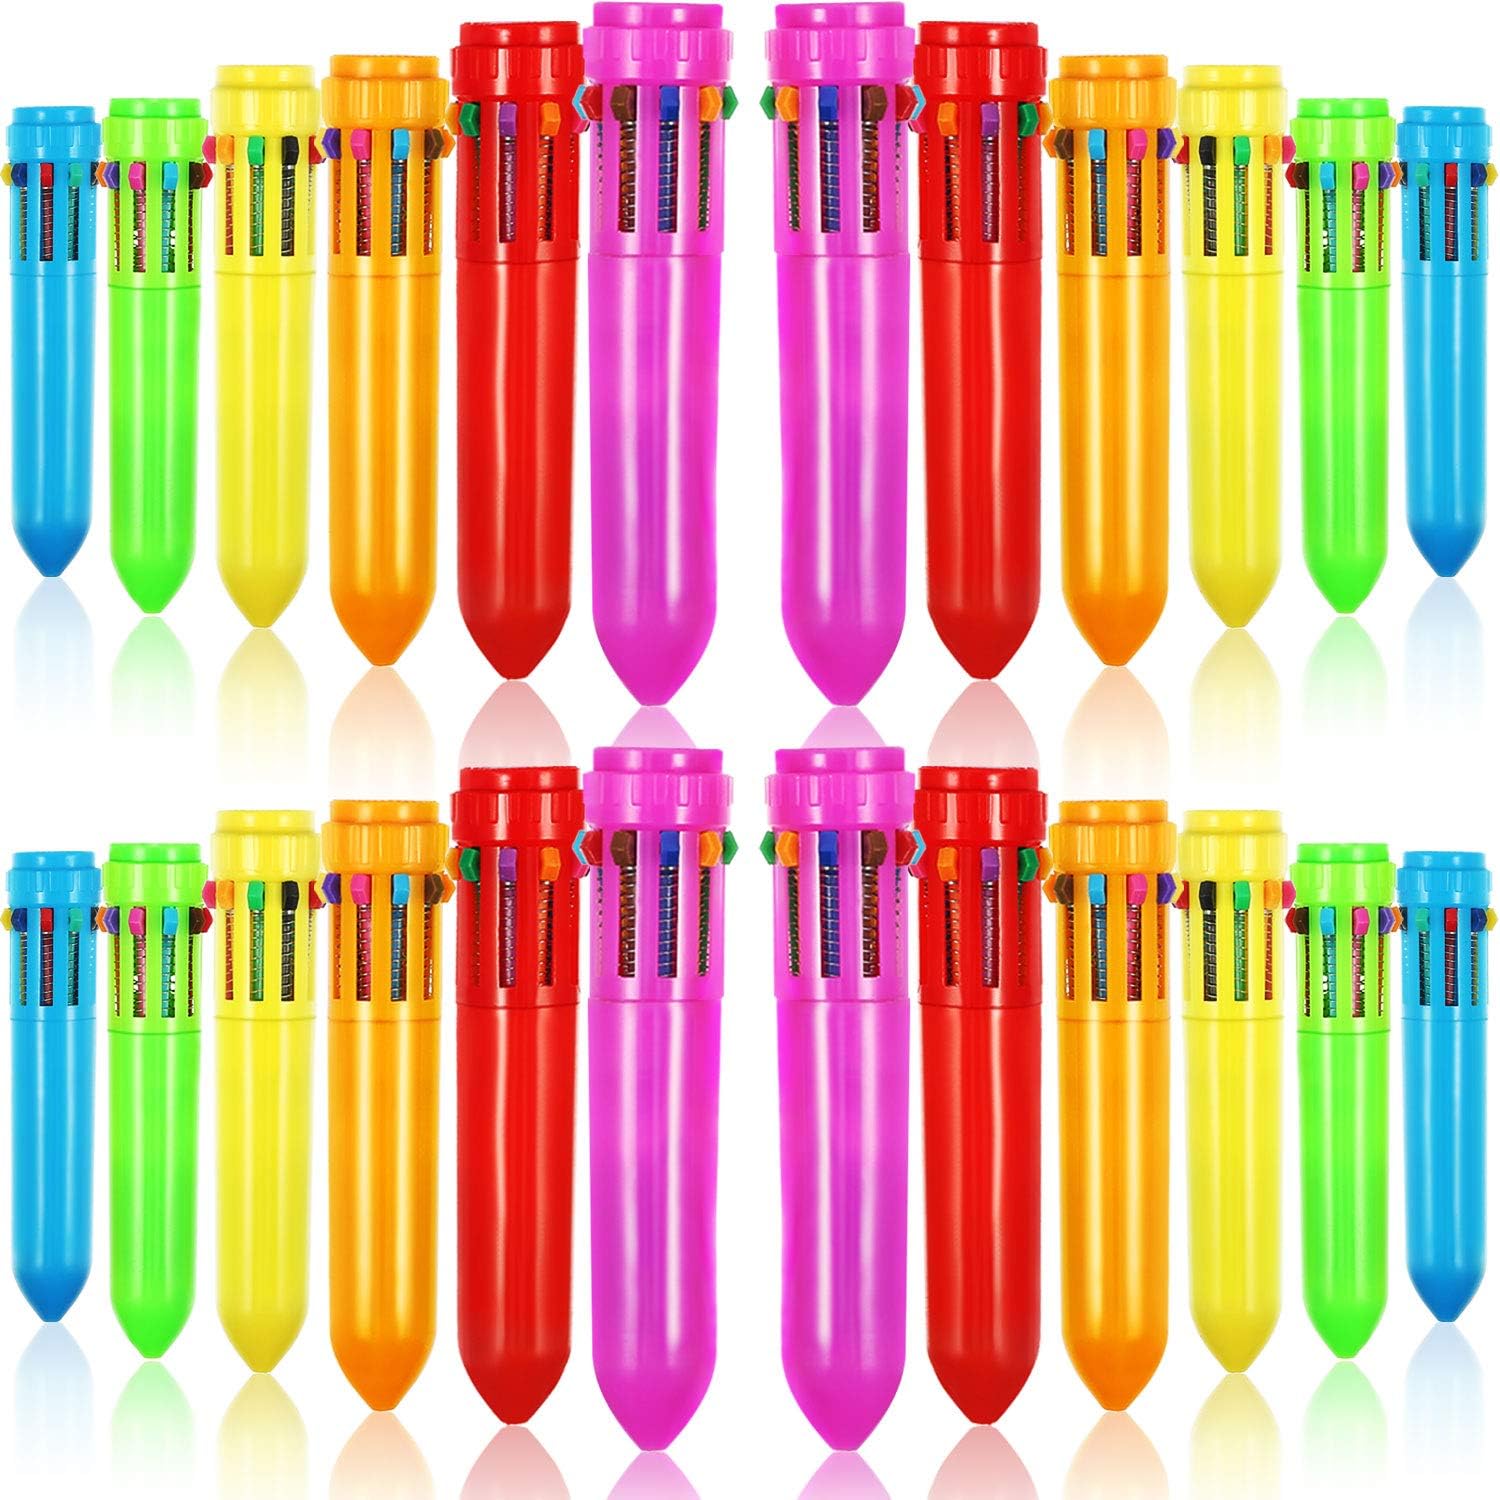 10in1 Retractable Ballpoint Pens Multicolor Pens for Students Kids